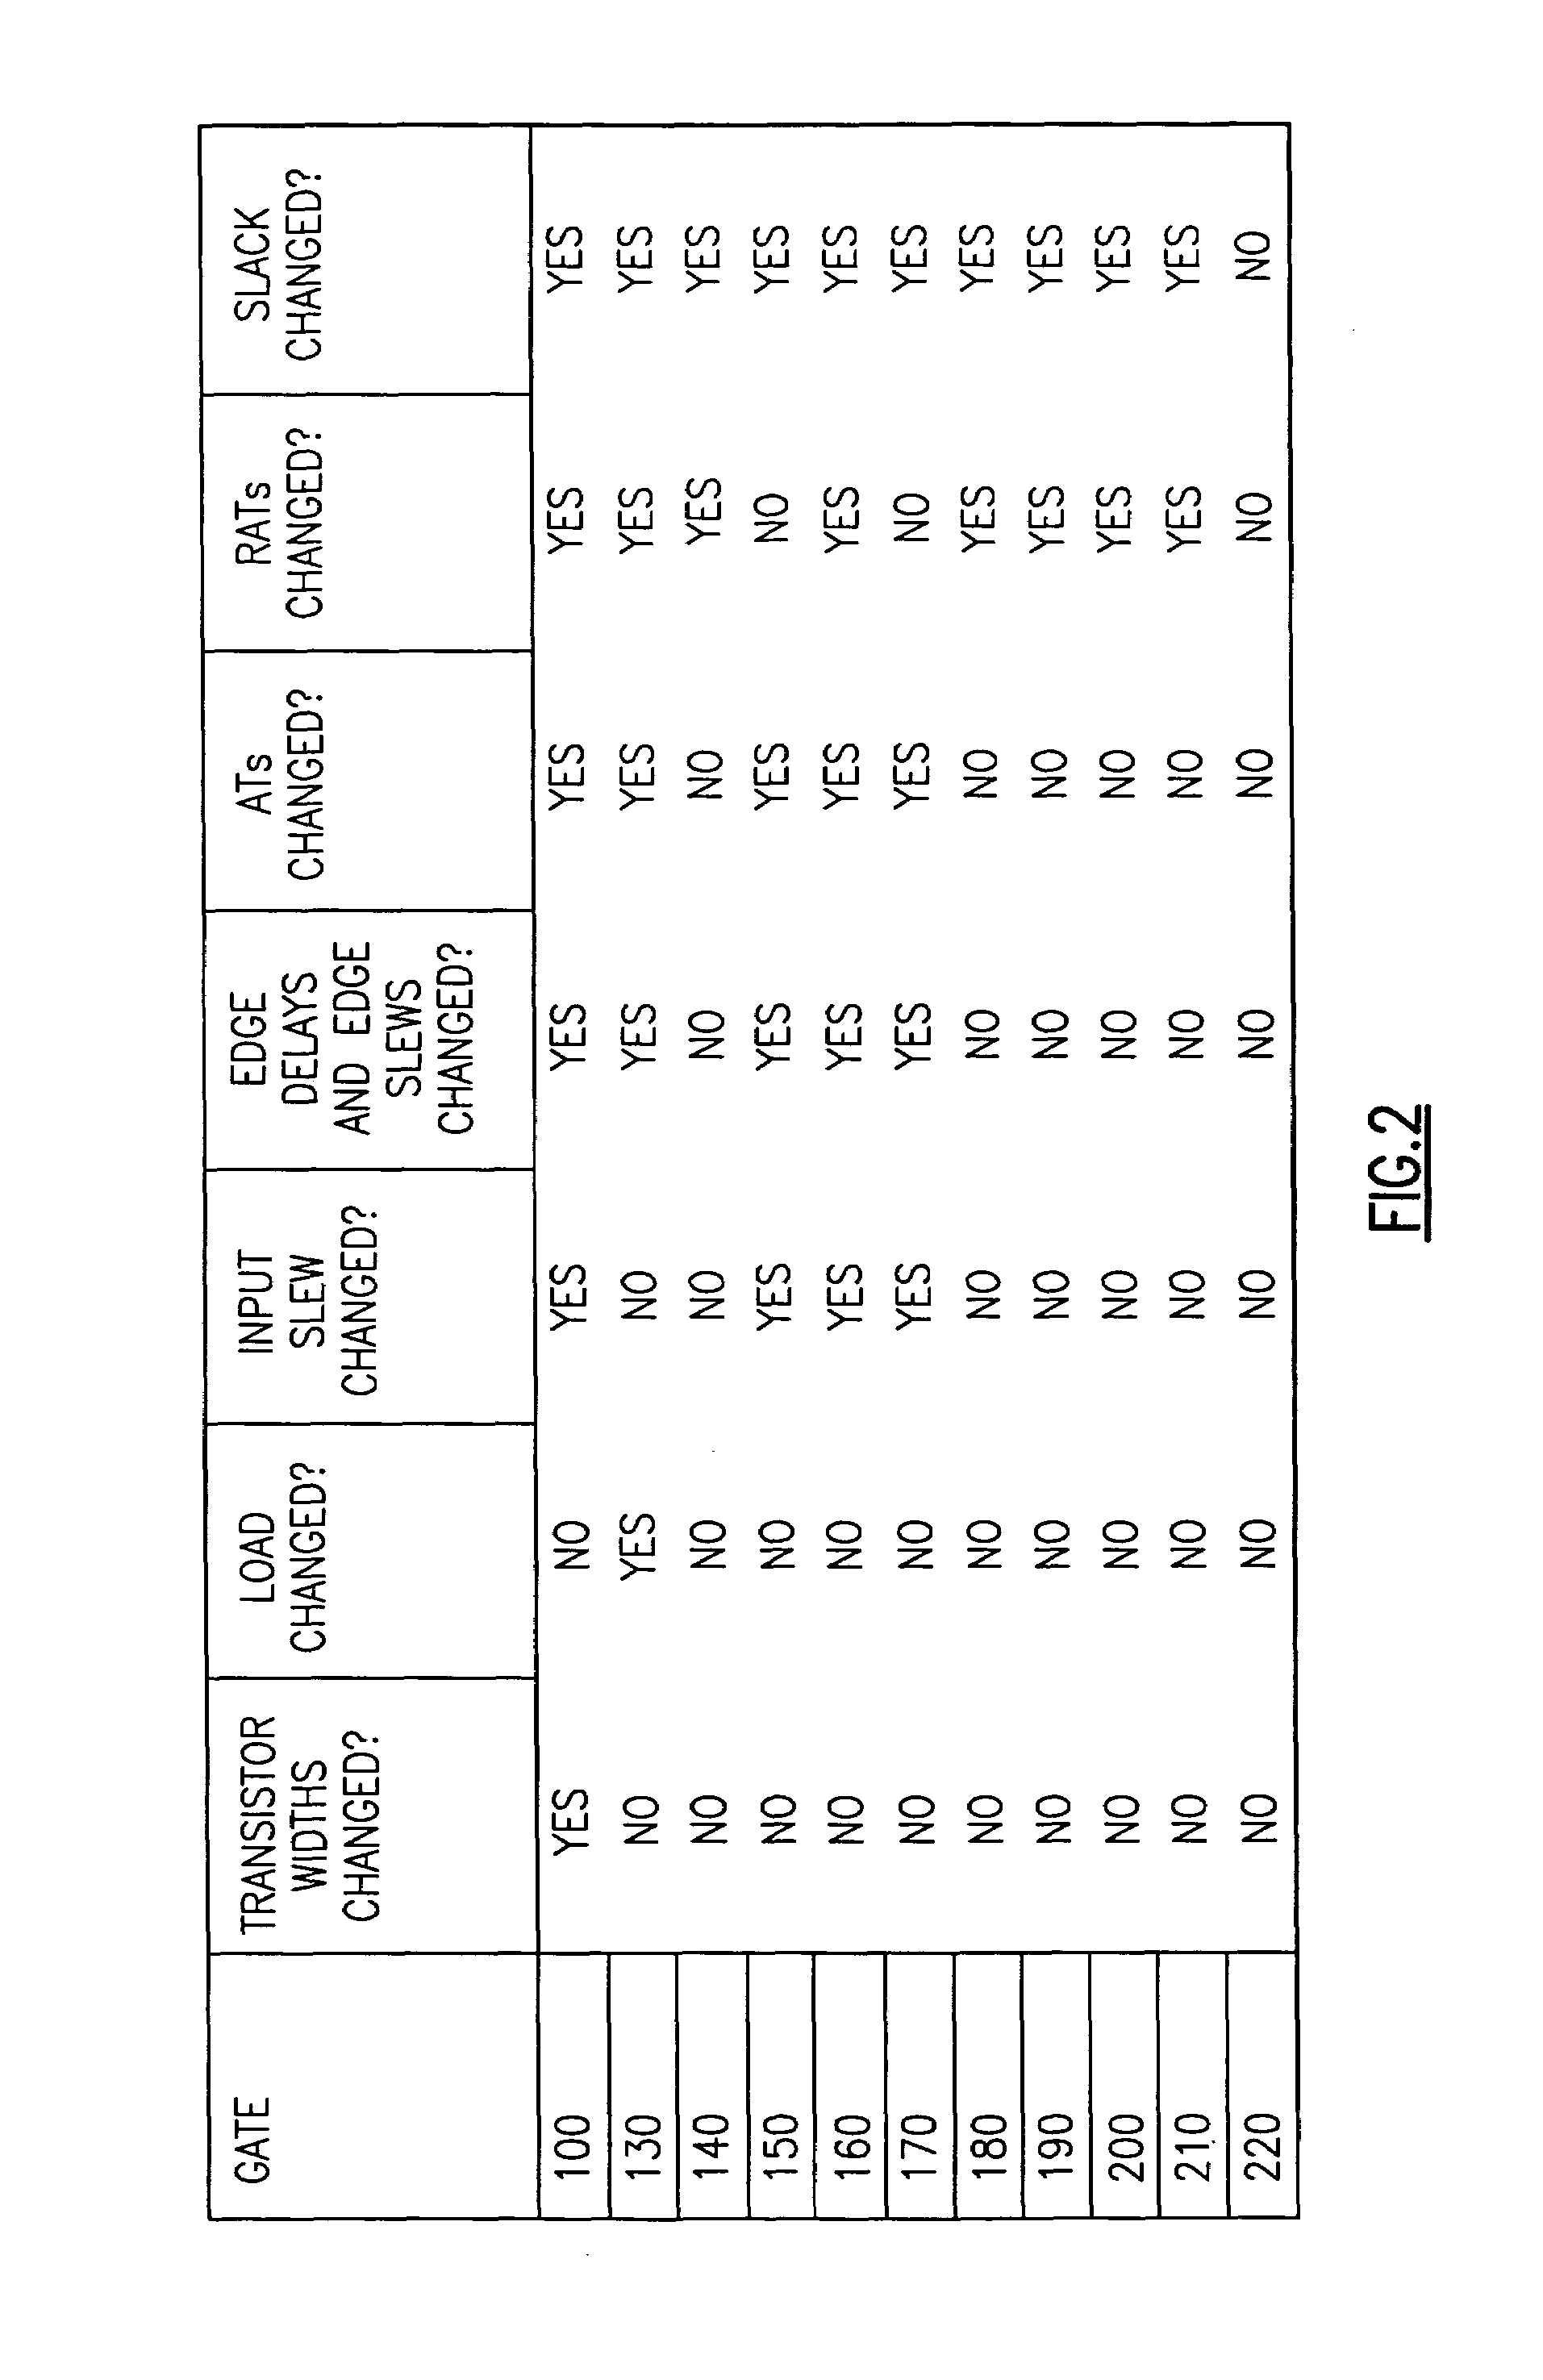 Method of optimizing and analyzing selected portions of a digital integrated circuit